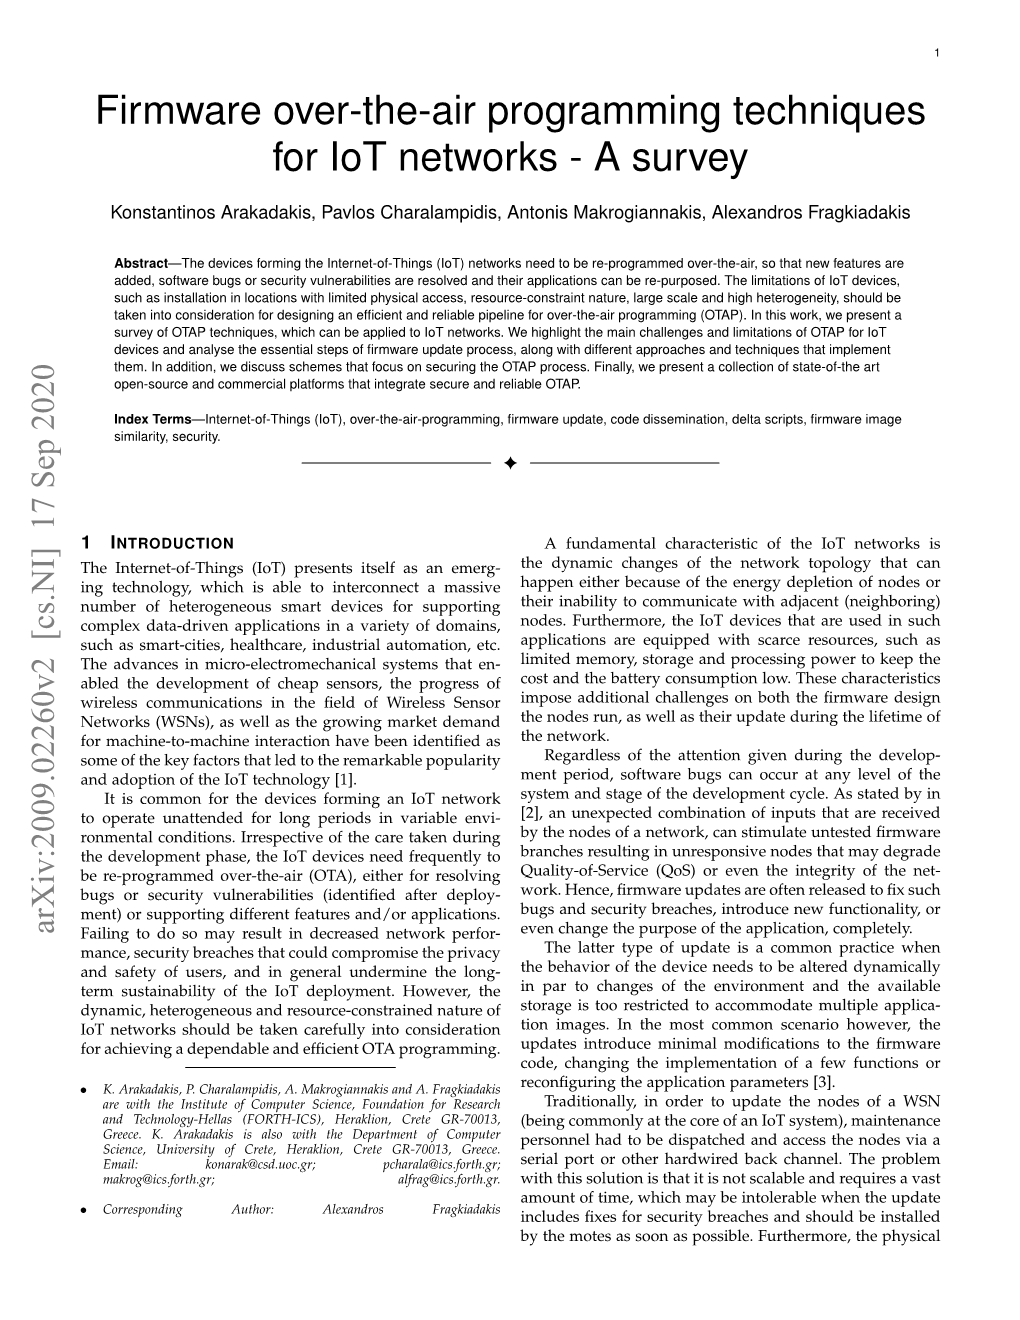 Firmware Over-The-Air Programming Techniques for Iot Networks - a Survey